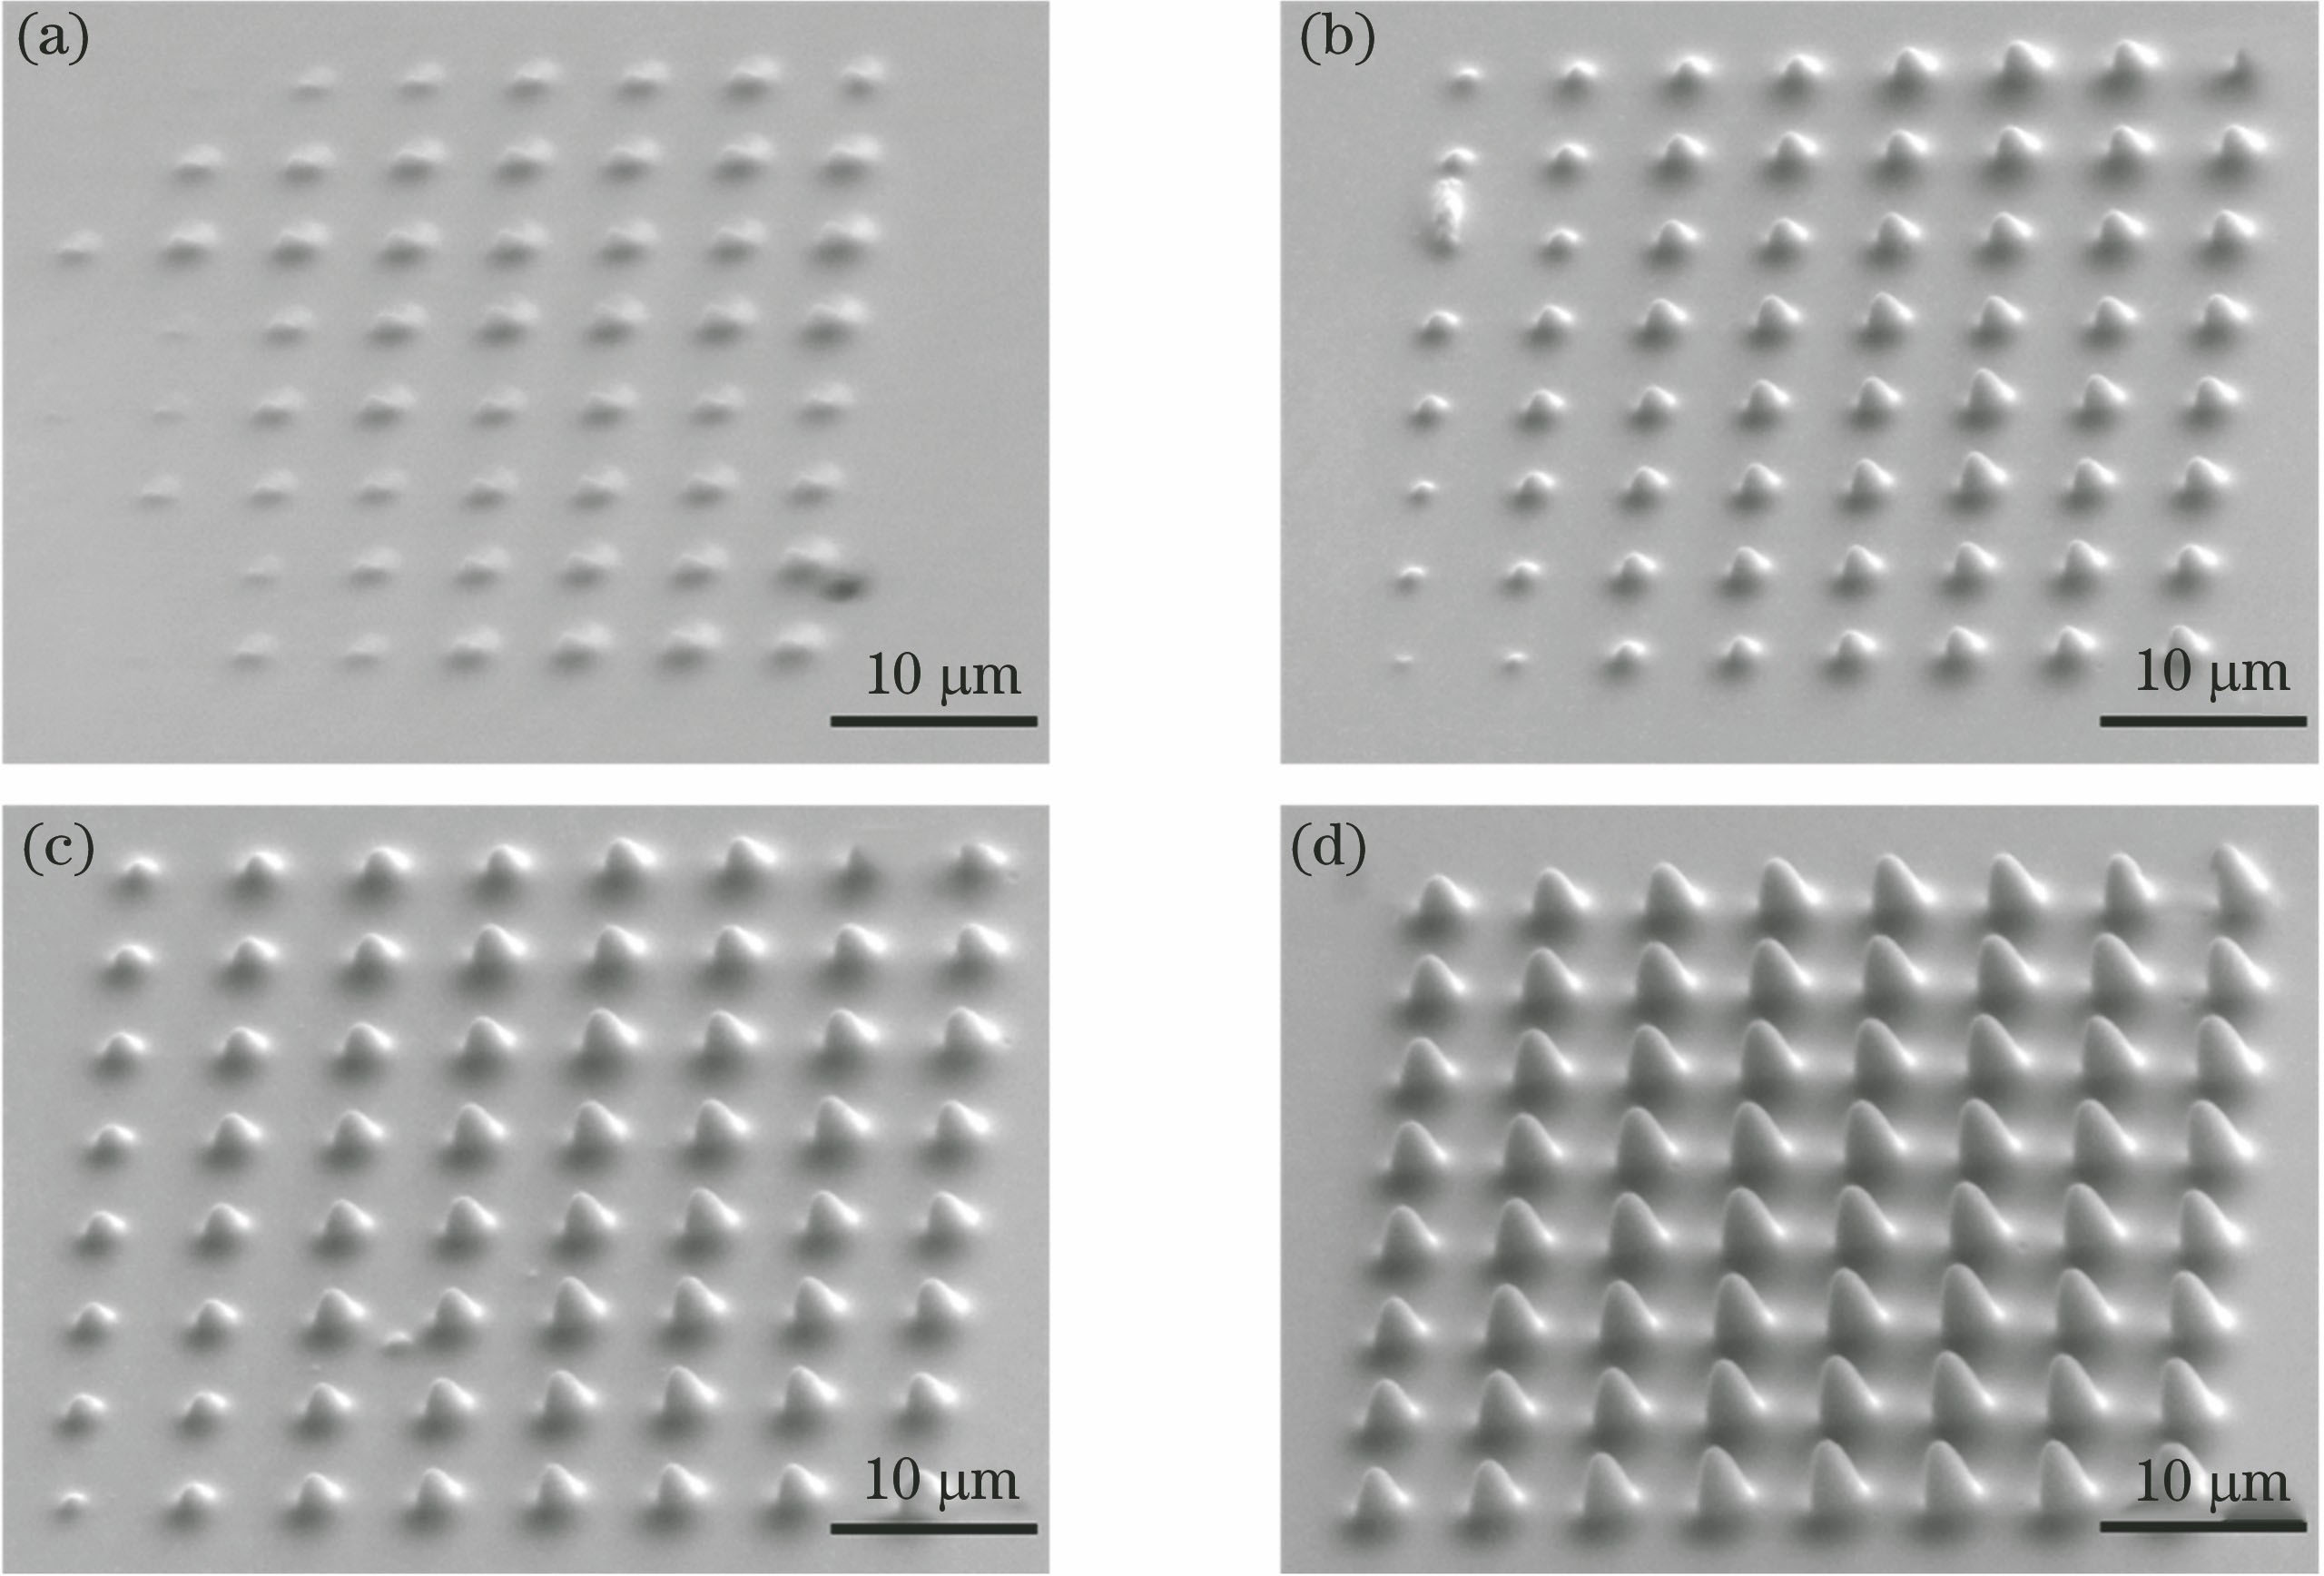 SEM images of lattice microstructures obtained by superimposing blazed grating under focus control mode for different output powers. (a) 5 mW; (b) 10 mW; (c) 15 mW; (d) 20 mW